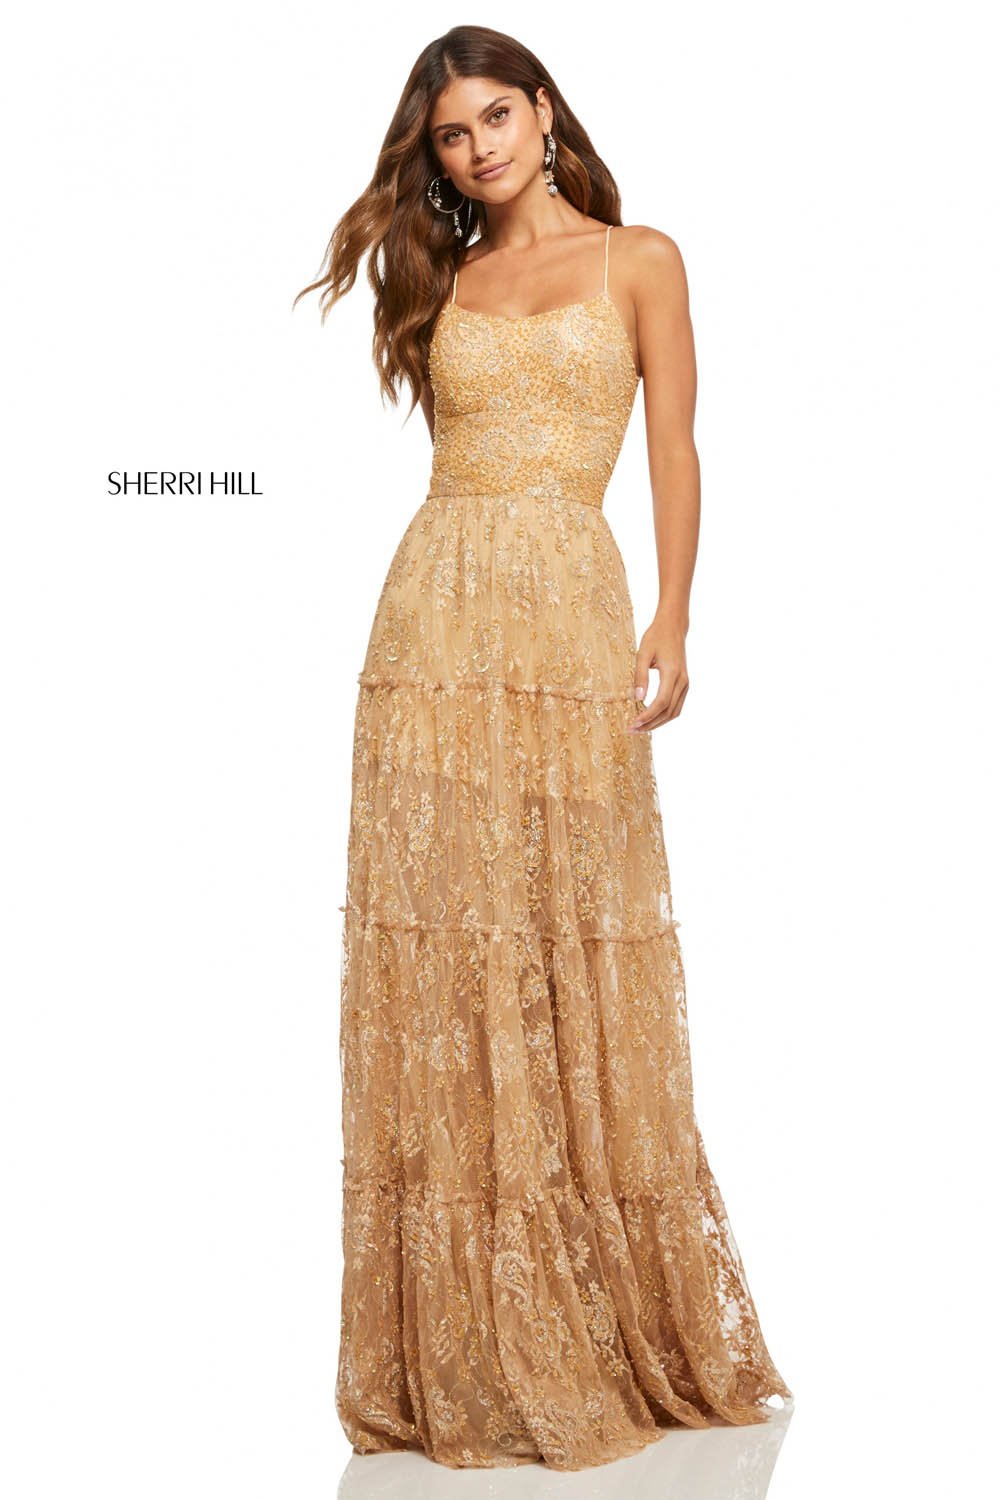 Sherri Hill 52675 dress images in these colors: Gold.